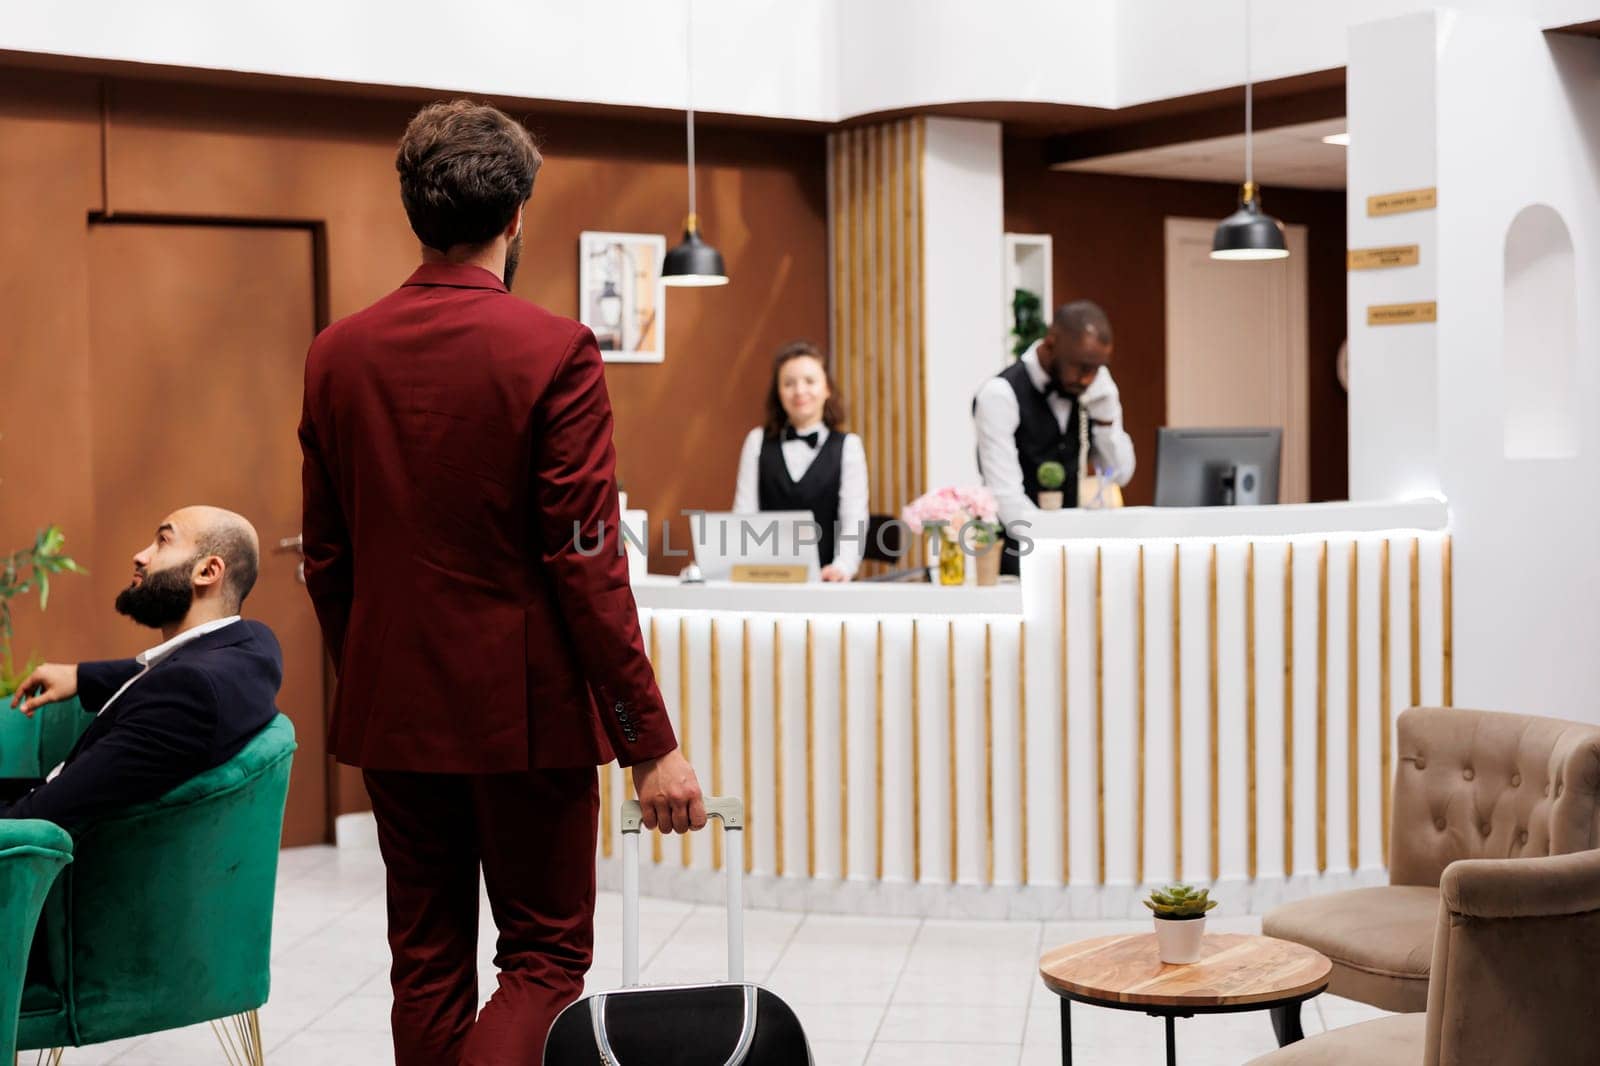 Formal guest enter reception area, carrying suitcase at front desk to do check in process. Businessman in suit with luggage trolley travelling for work purposes, staff ensuring pleasant stay.